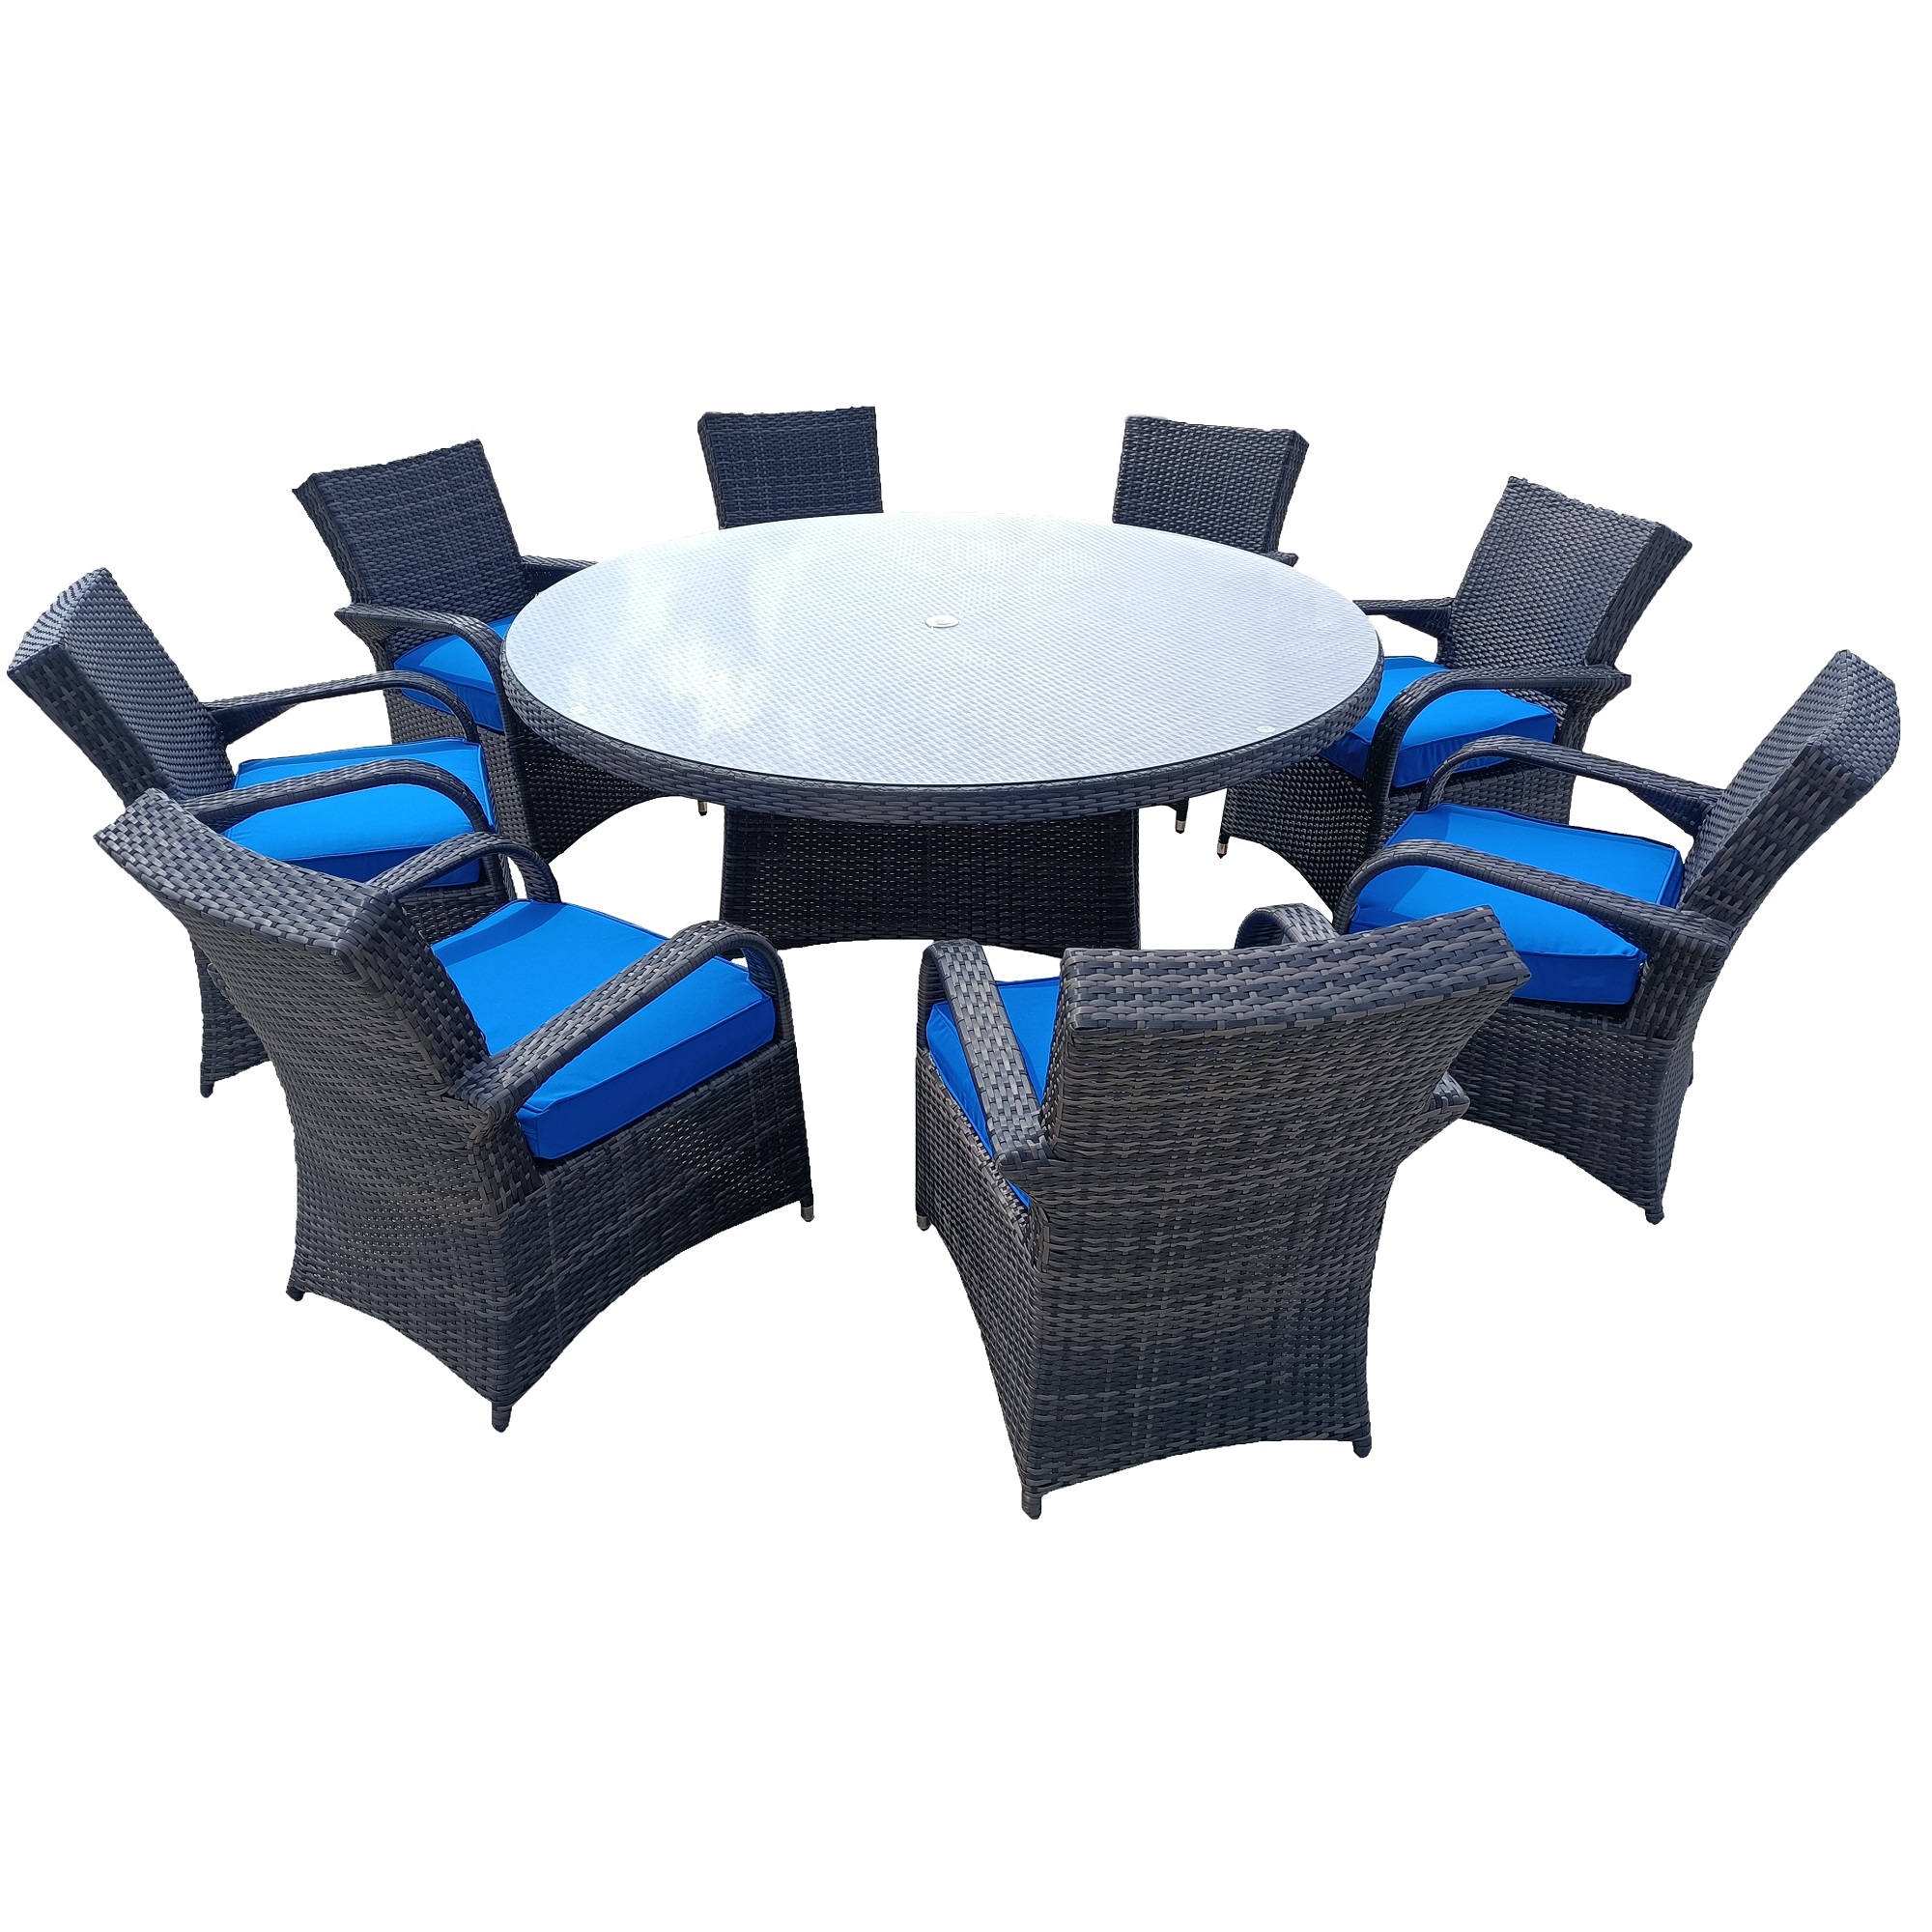 9PCS Patio Set Rattan Dining Chair Table Set Cushioned Chairs W/ Umbrella Hole Aluminium Frame Full Assemble 8 Seating Capacity -- Blue - image 1 of 6